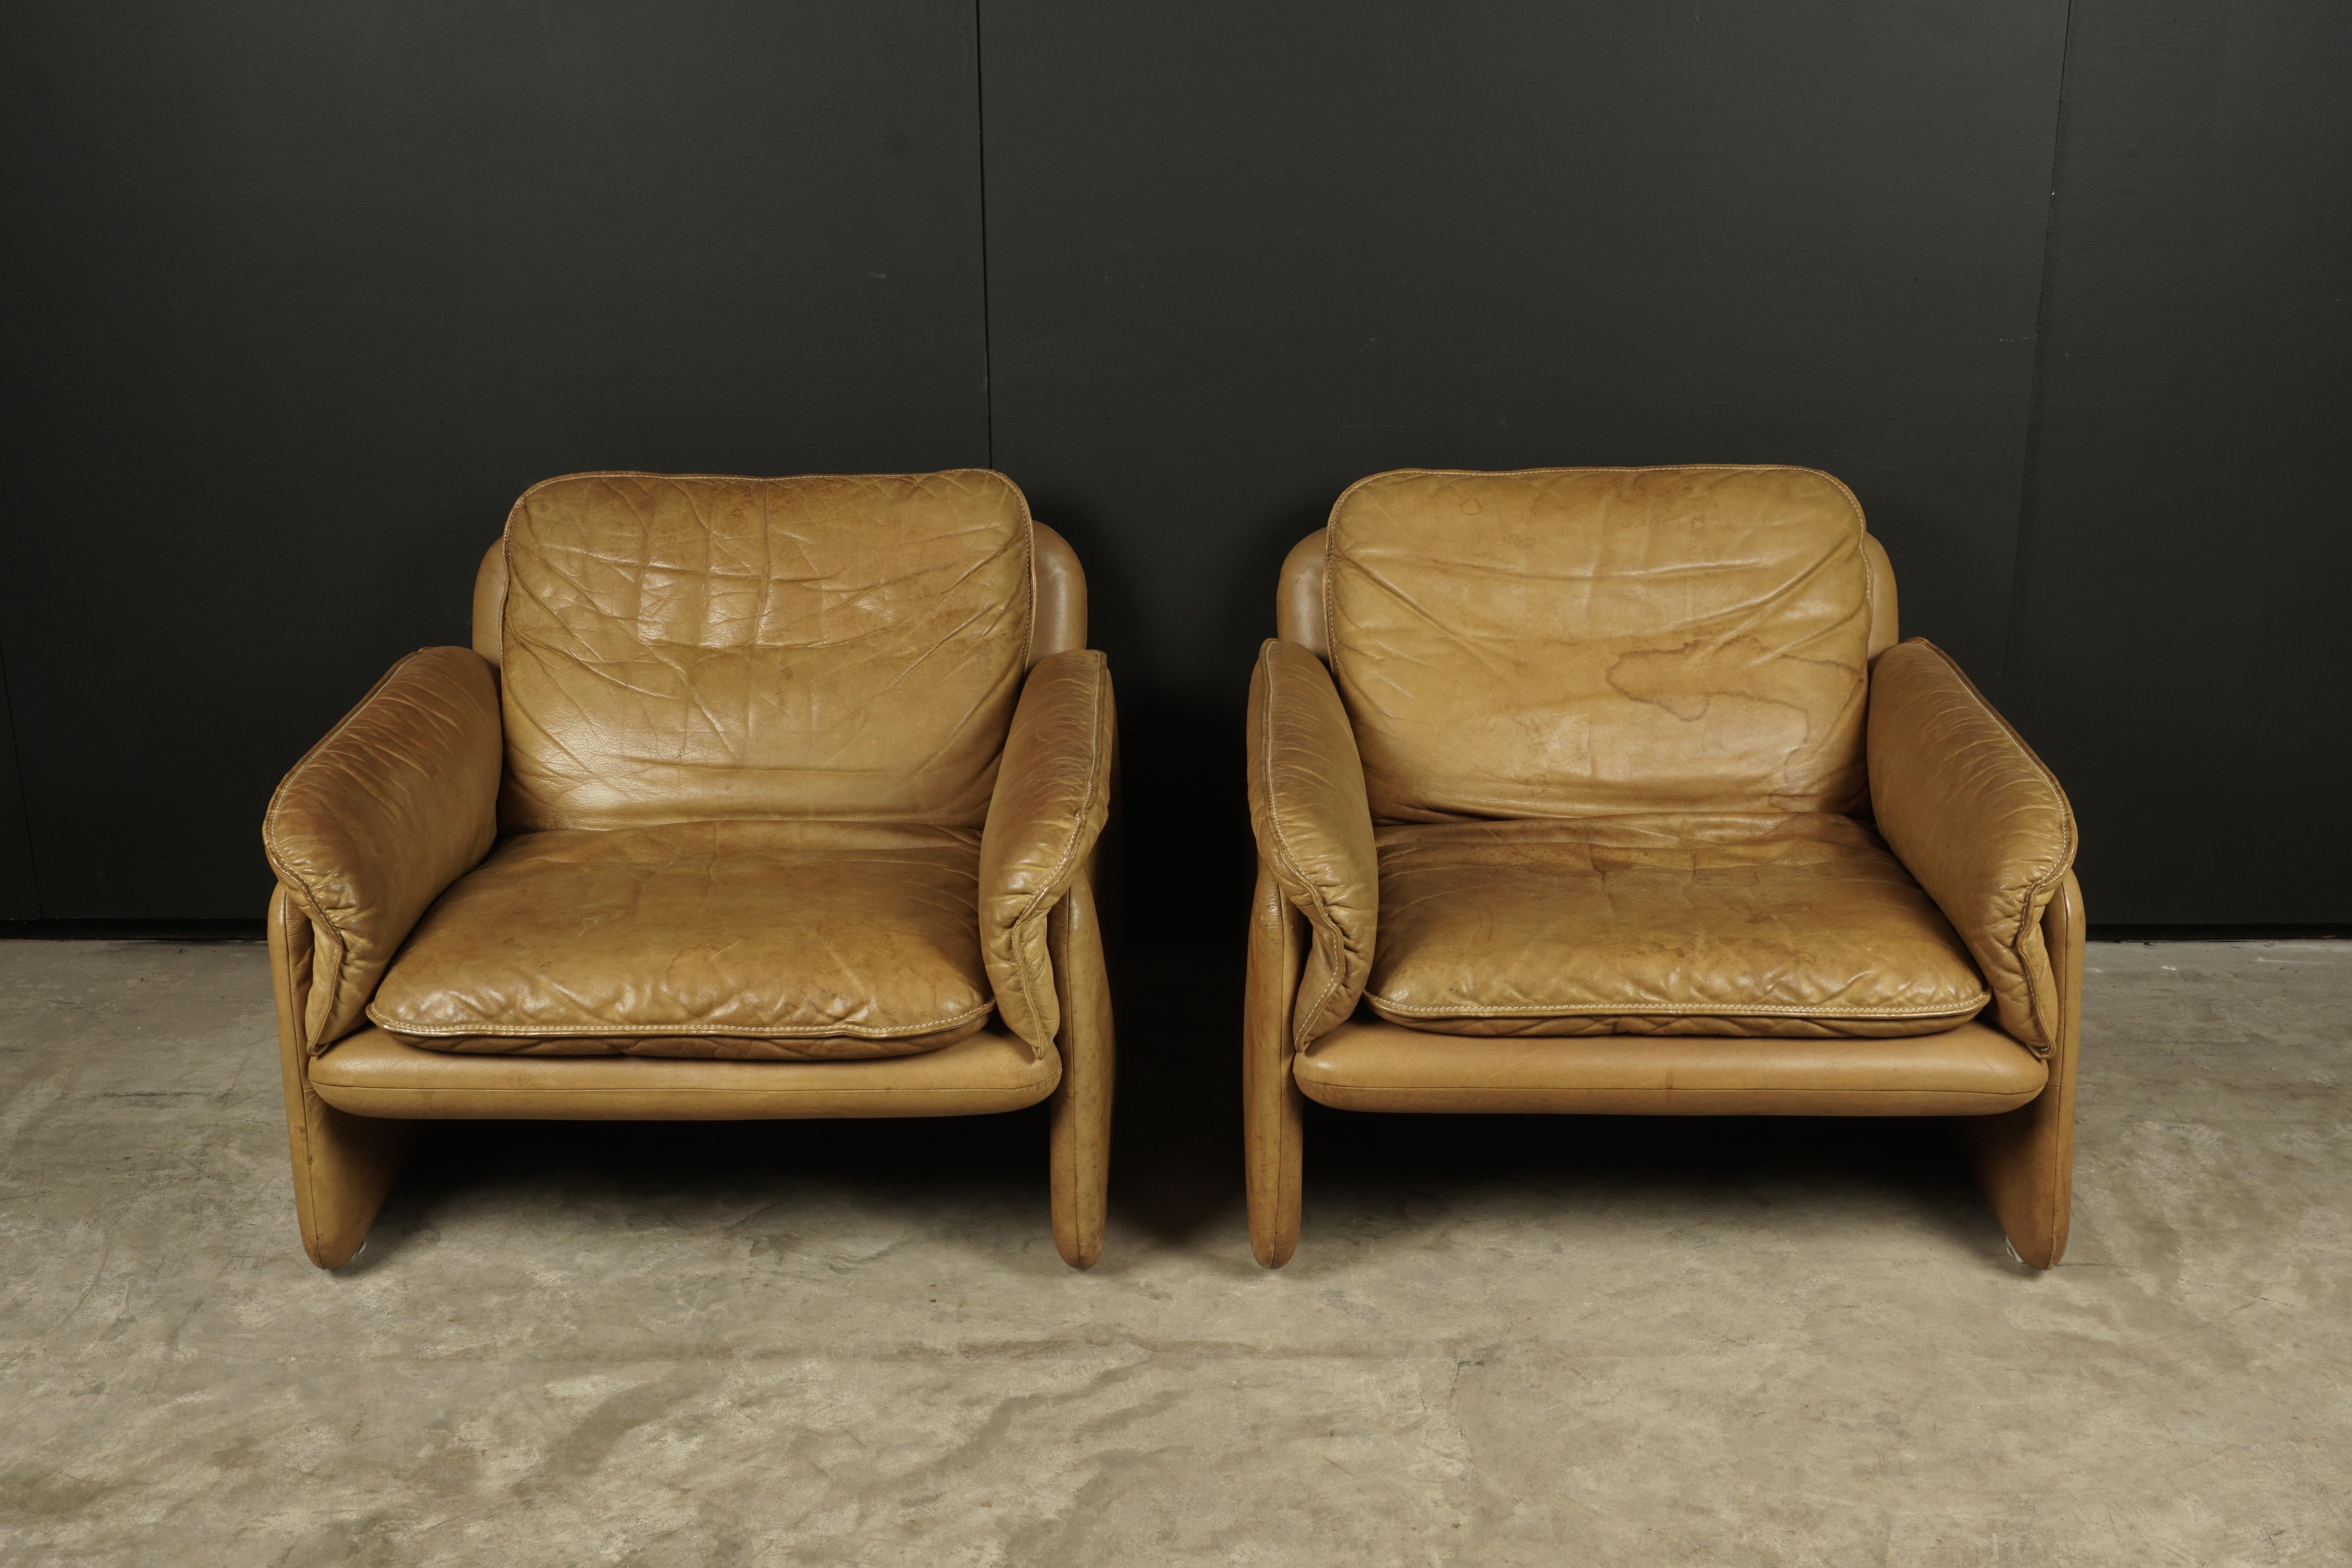 Vintage pair of leather DS 61 De Sede lounge chairs, from Switzerland, circa 1980. Original cognac leather upholstery with nice patina and wear.